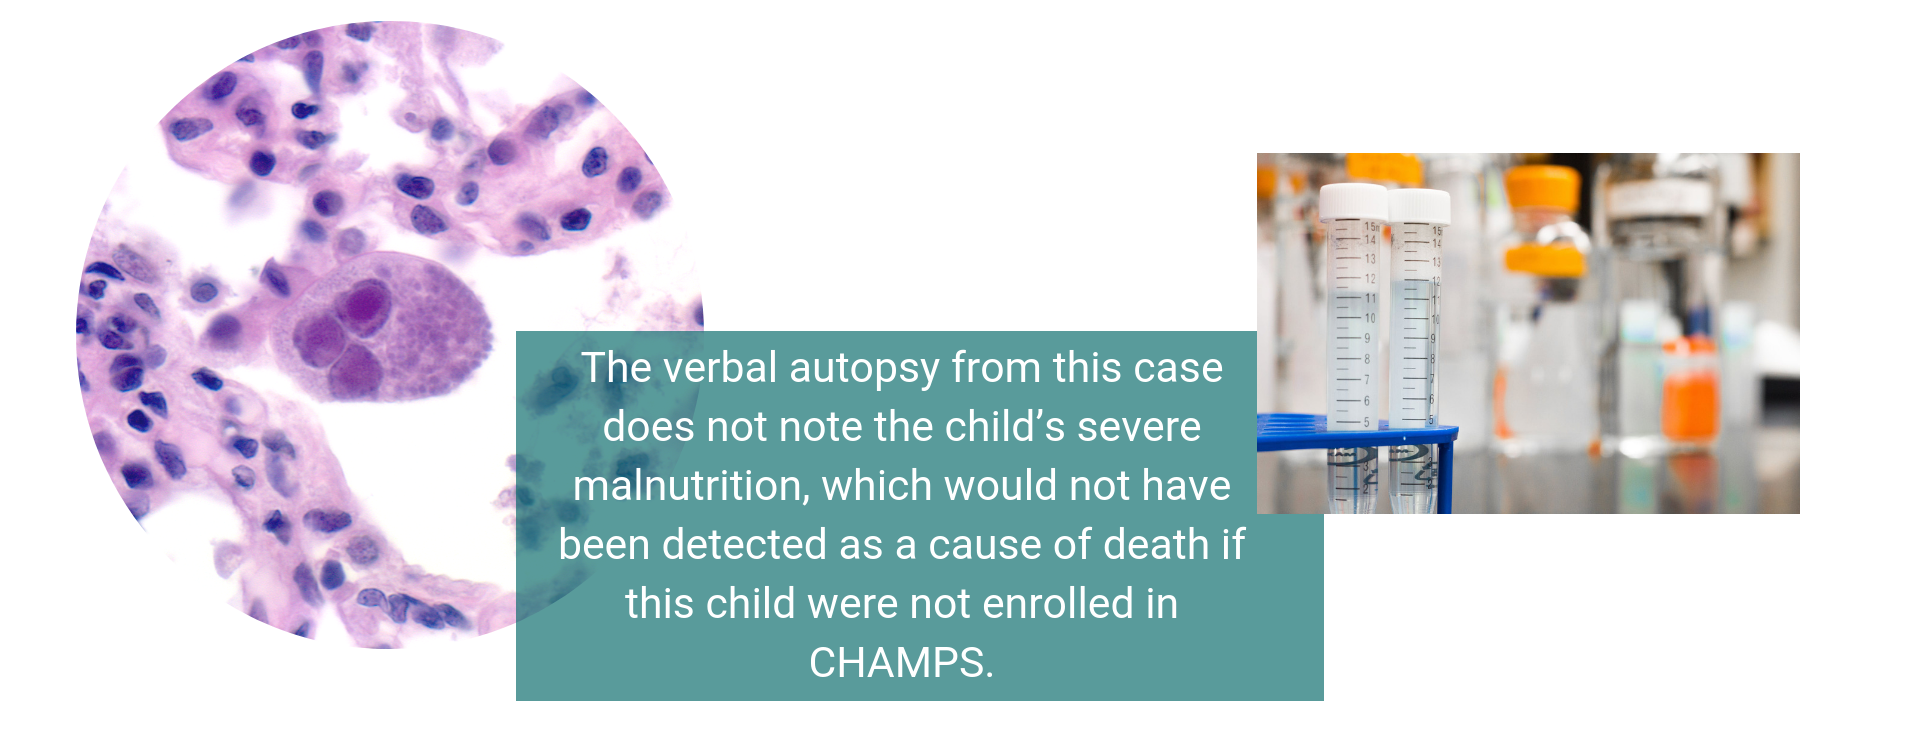 The verbal autopsy from this case does not note the child’s severe malnutrition, which would not have been detected as a cause of death if this child were not enrolled in CHAMPS.